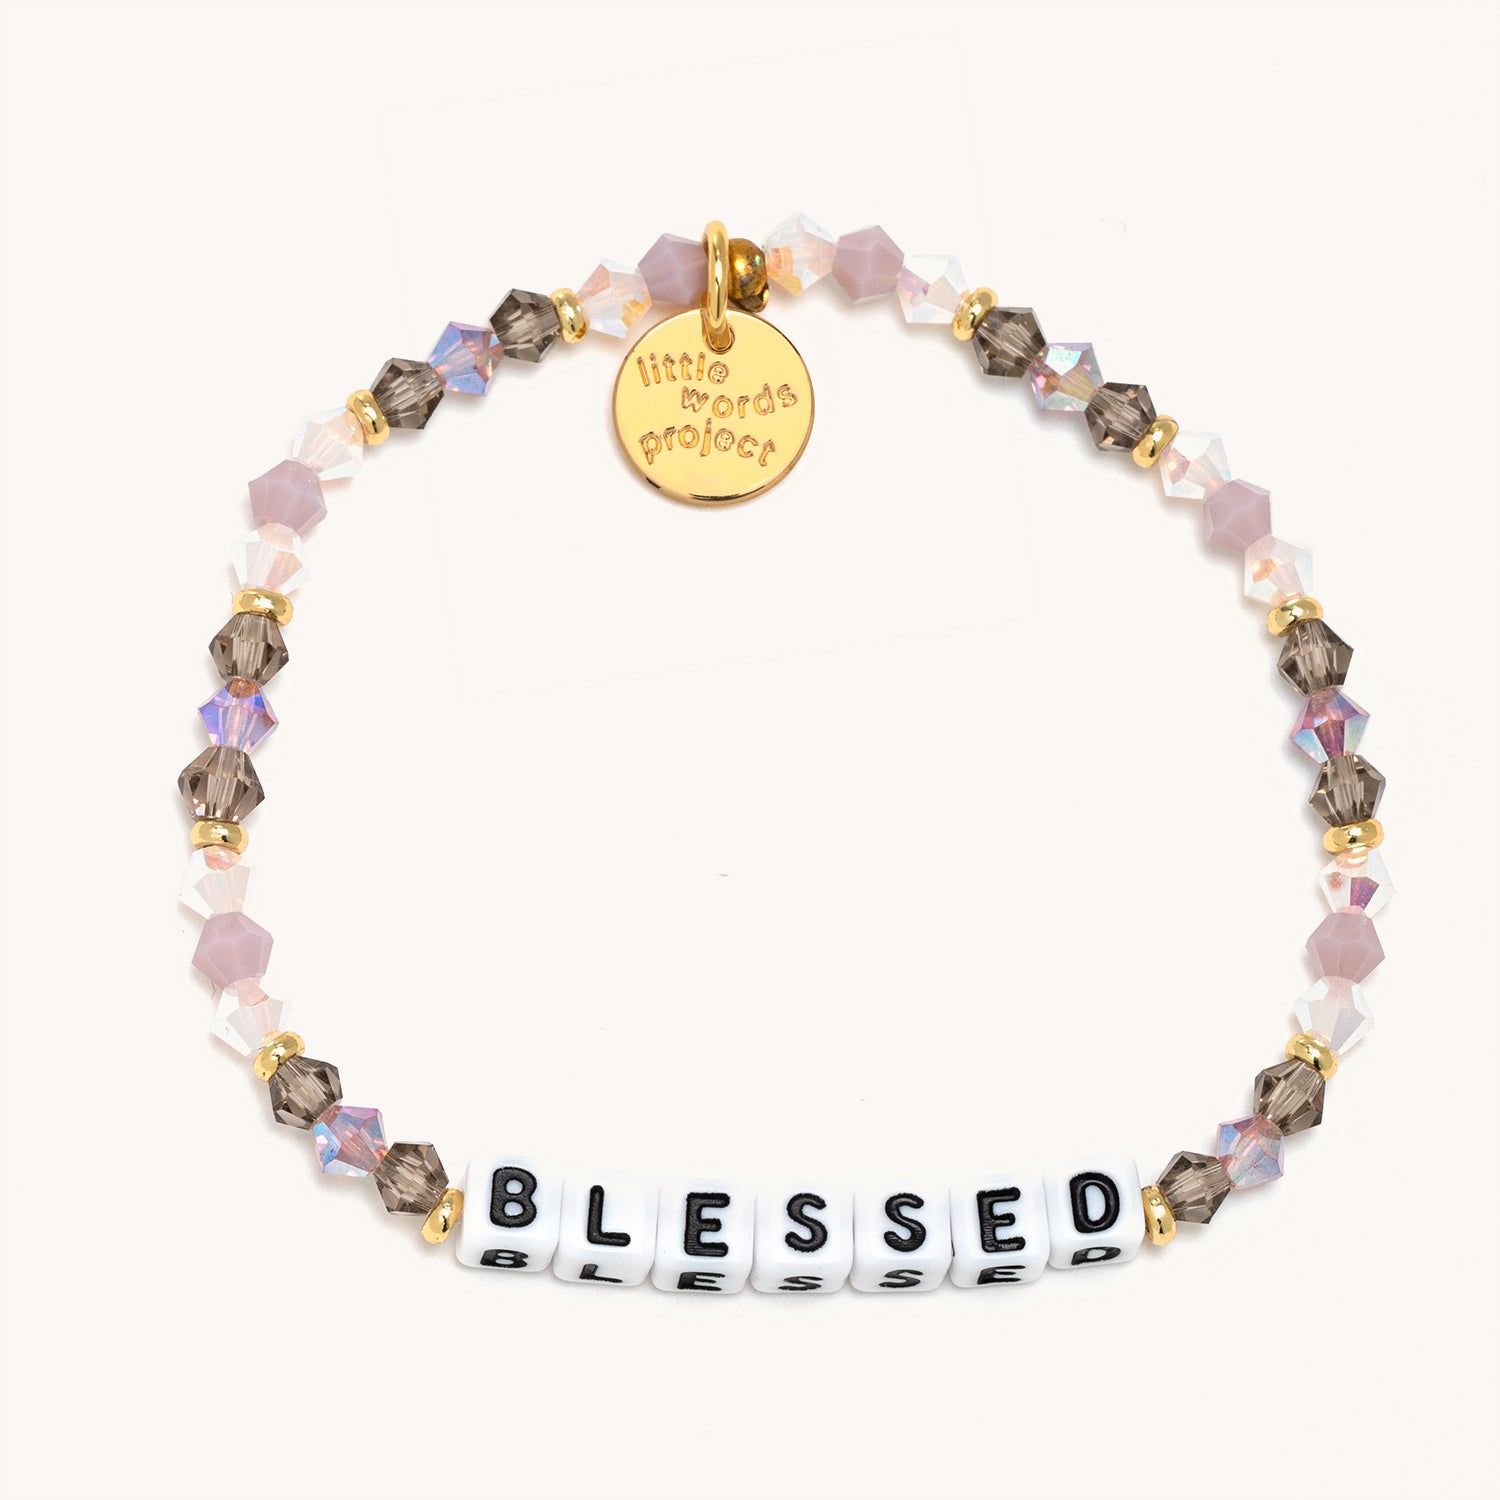 Blessed Beads  Blessed Beads Bracelets